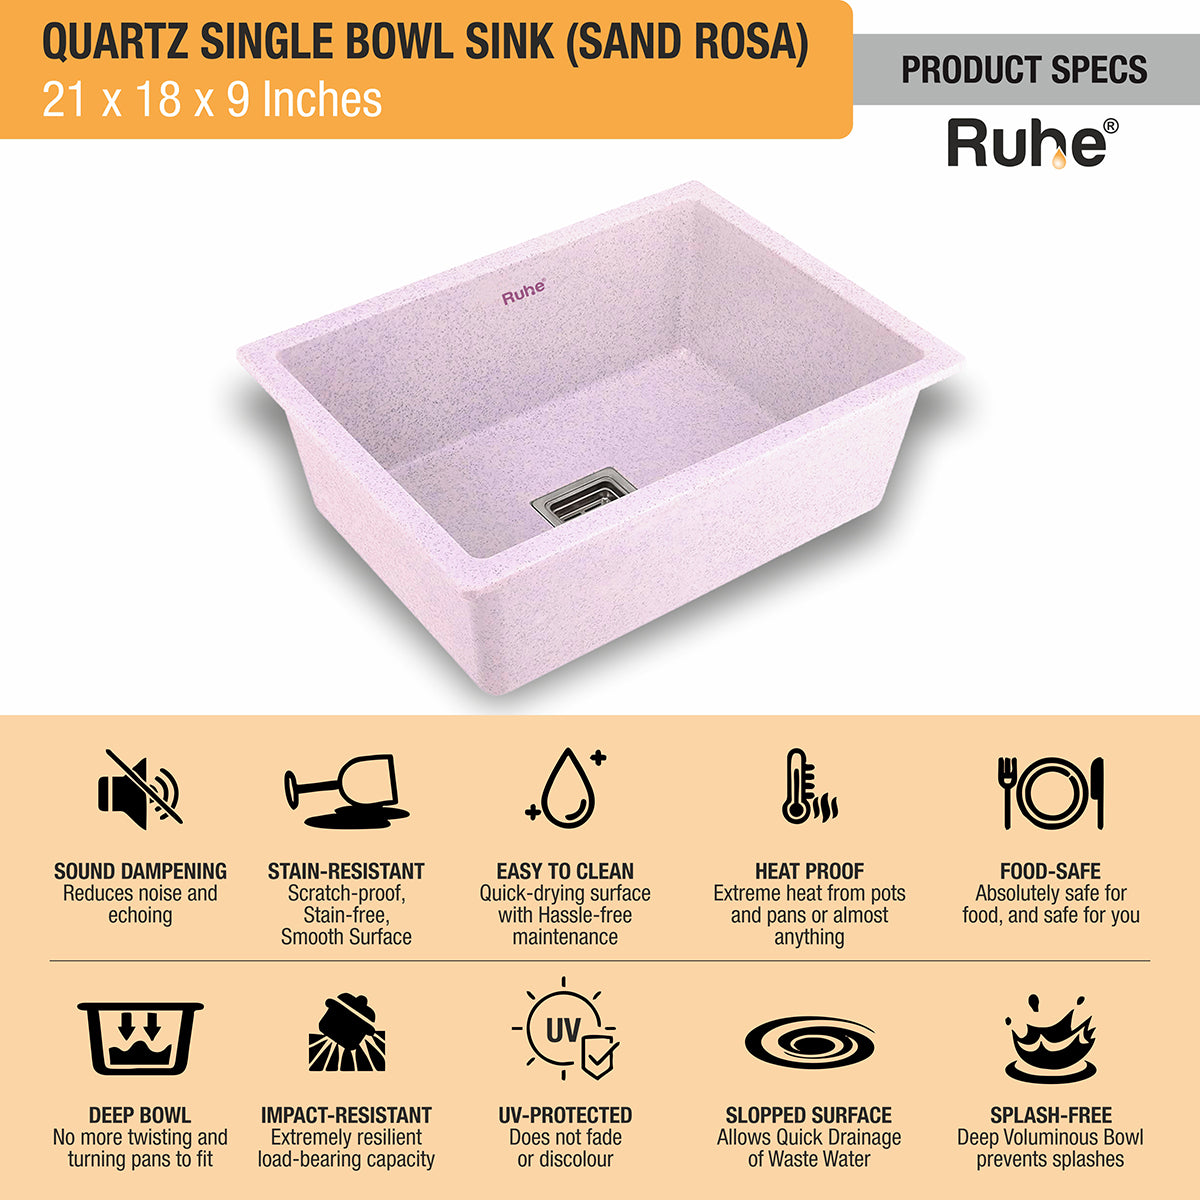 Quartz Sand Rosa Single Bowl Kitchen Sink (21 x 18 x 9 inches) features and benefits